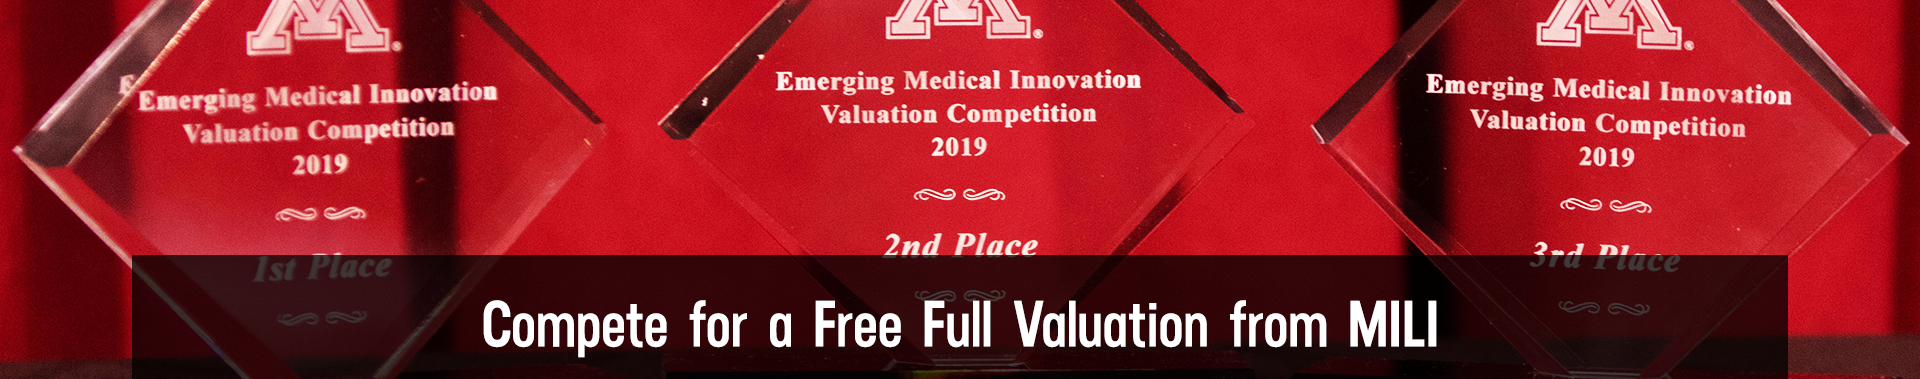 Emerging Medical Innovation Valuation Competition